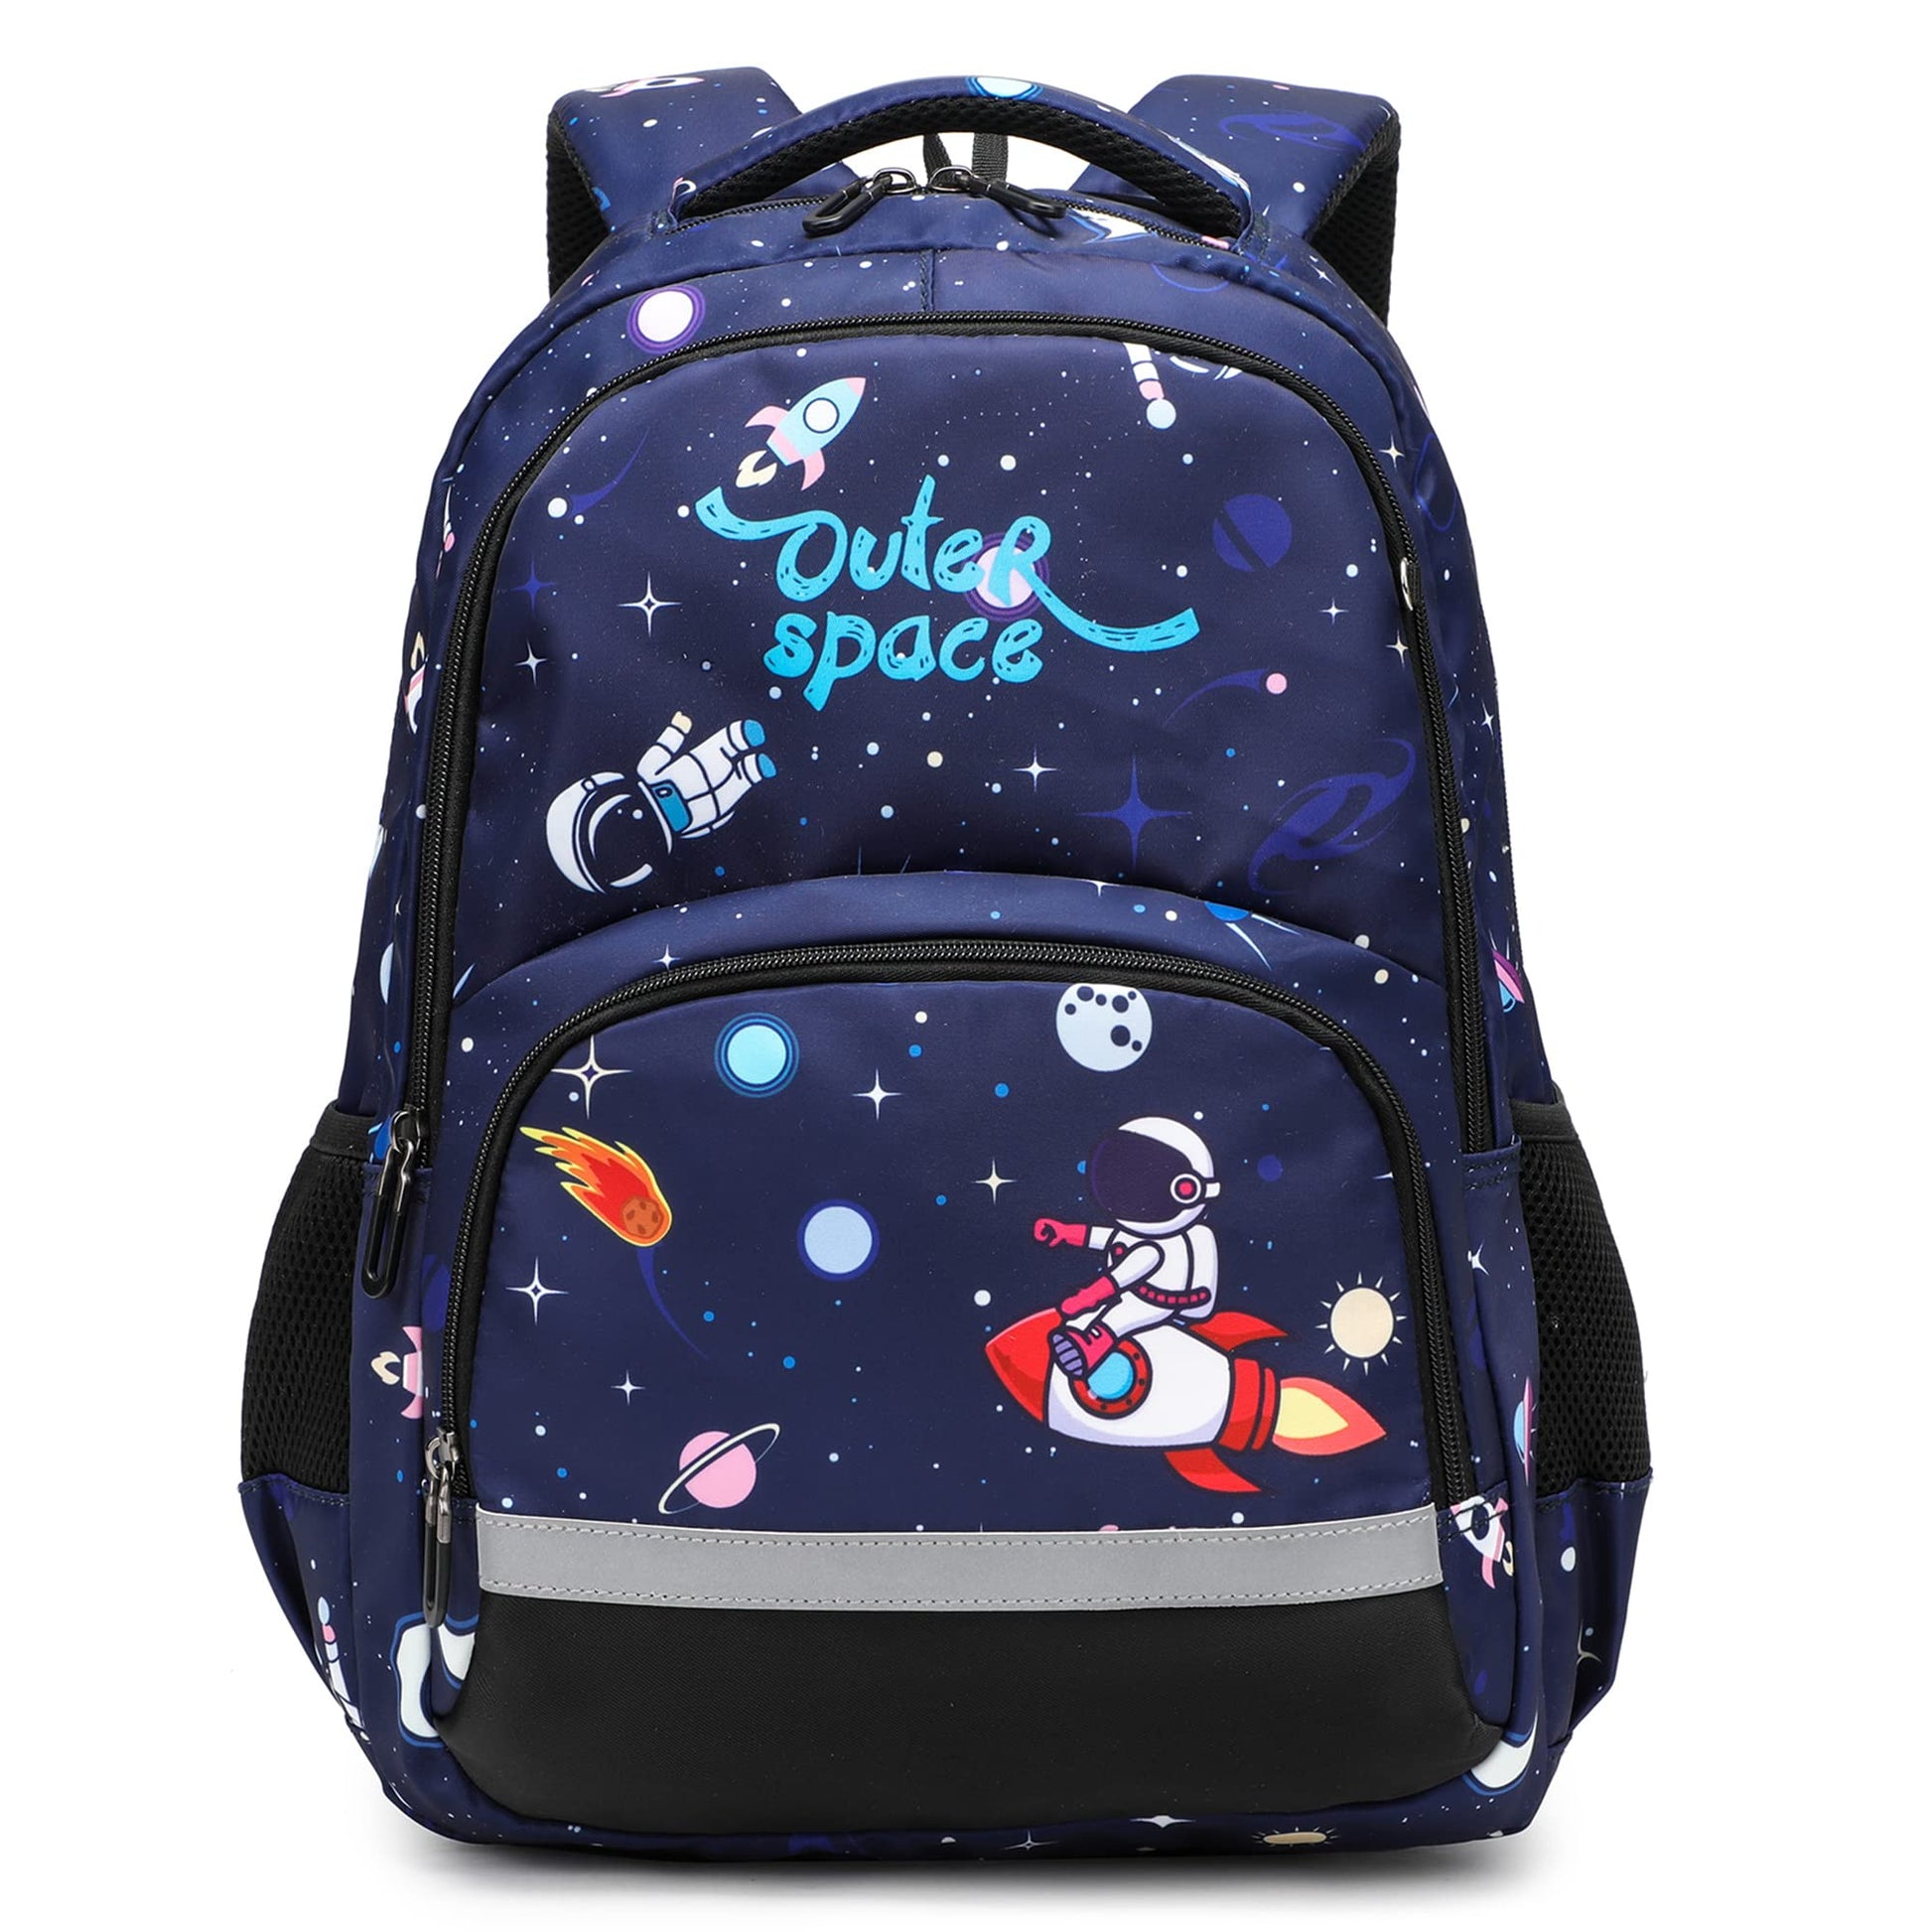 Robhomily Kids School Backpack for Boys